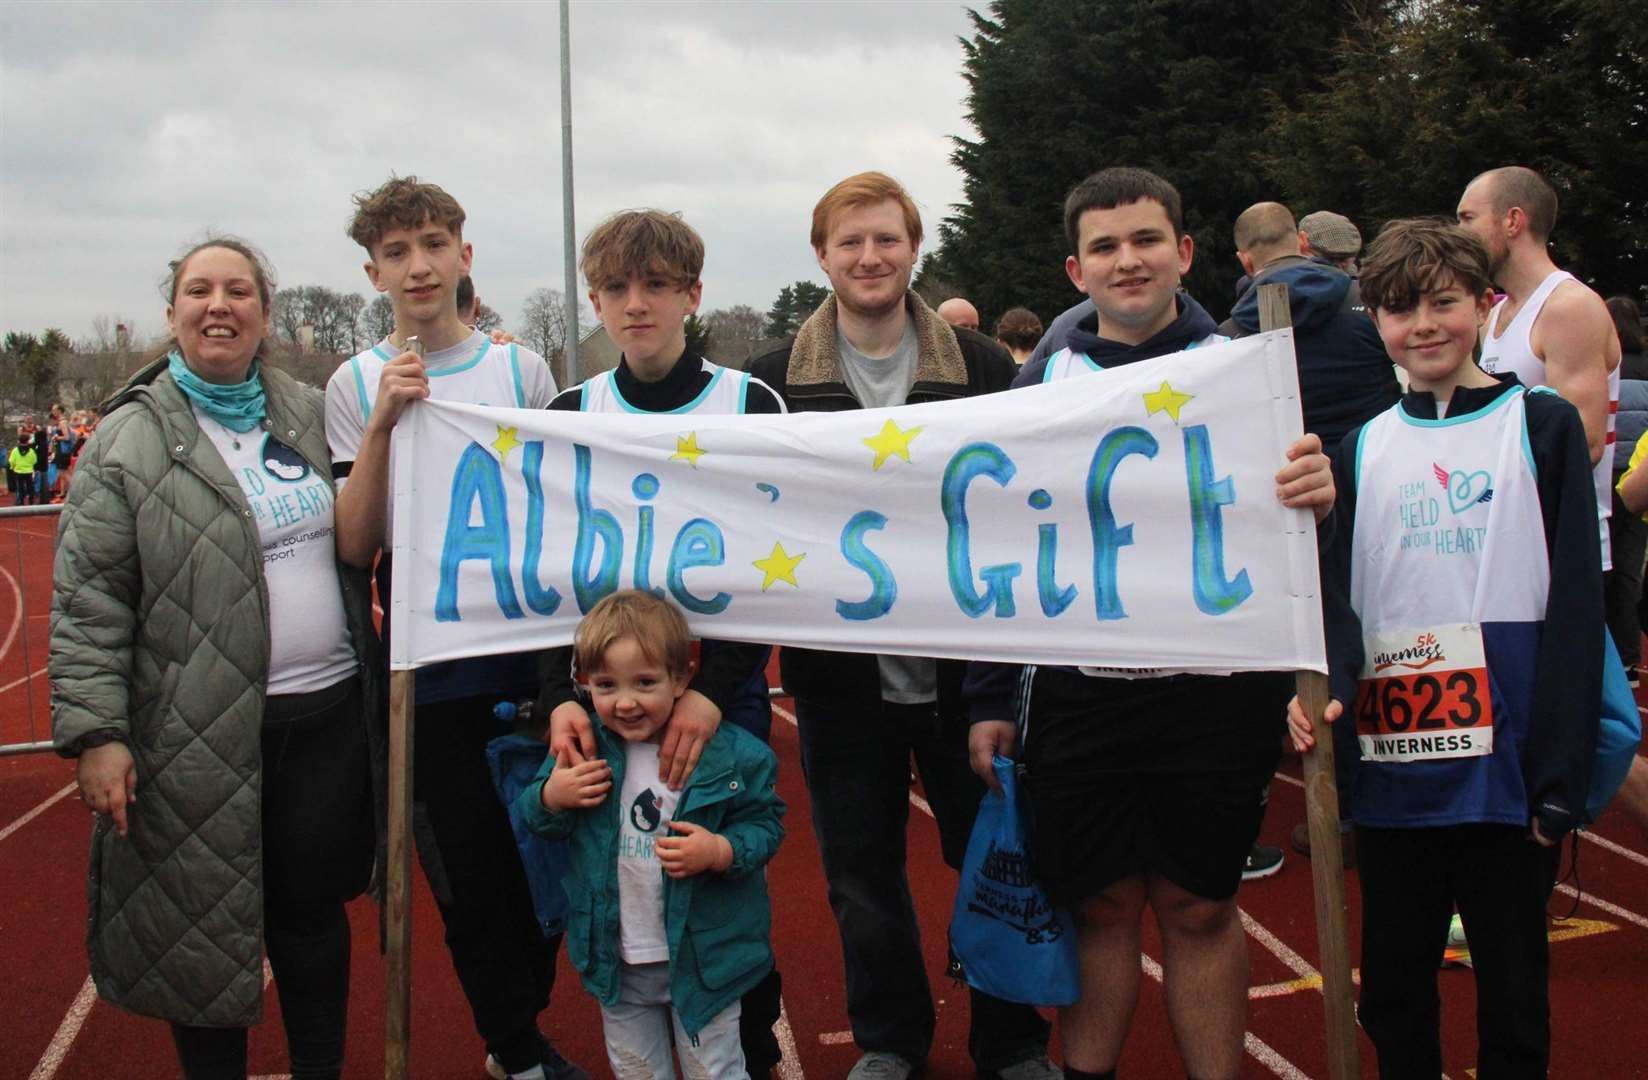 22 runners participated in the Inverness half marathon for Albie's Gift and Held In Our Hearts.